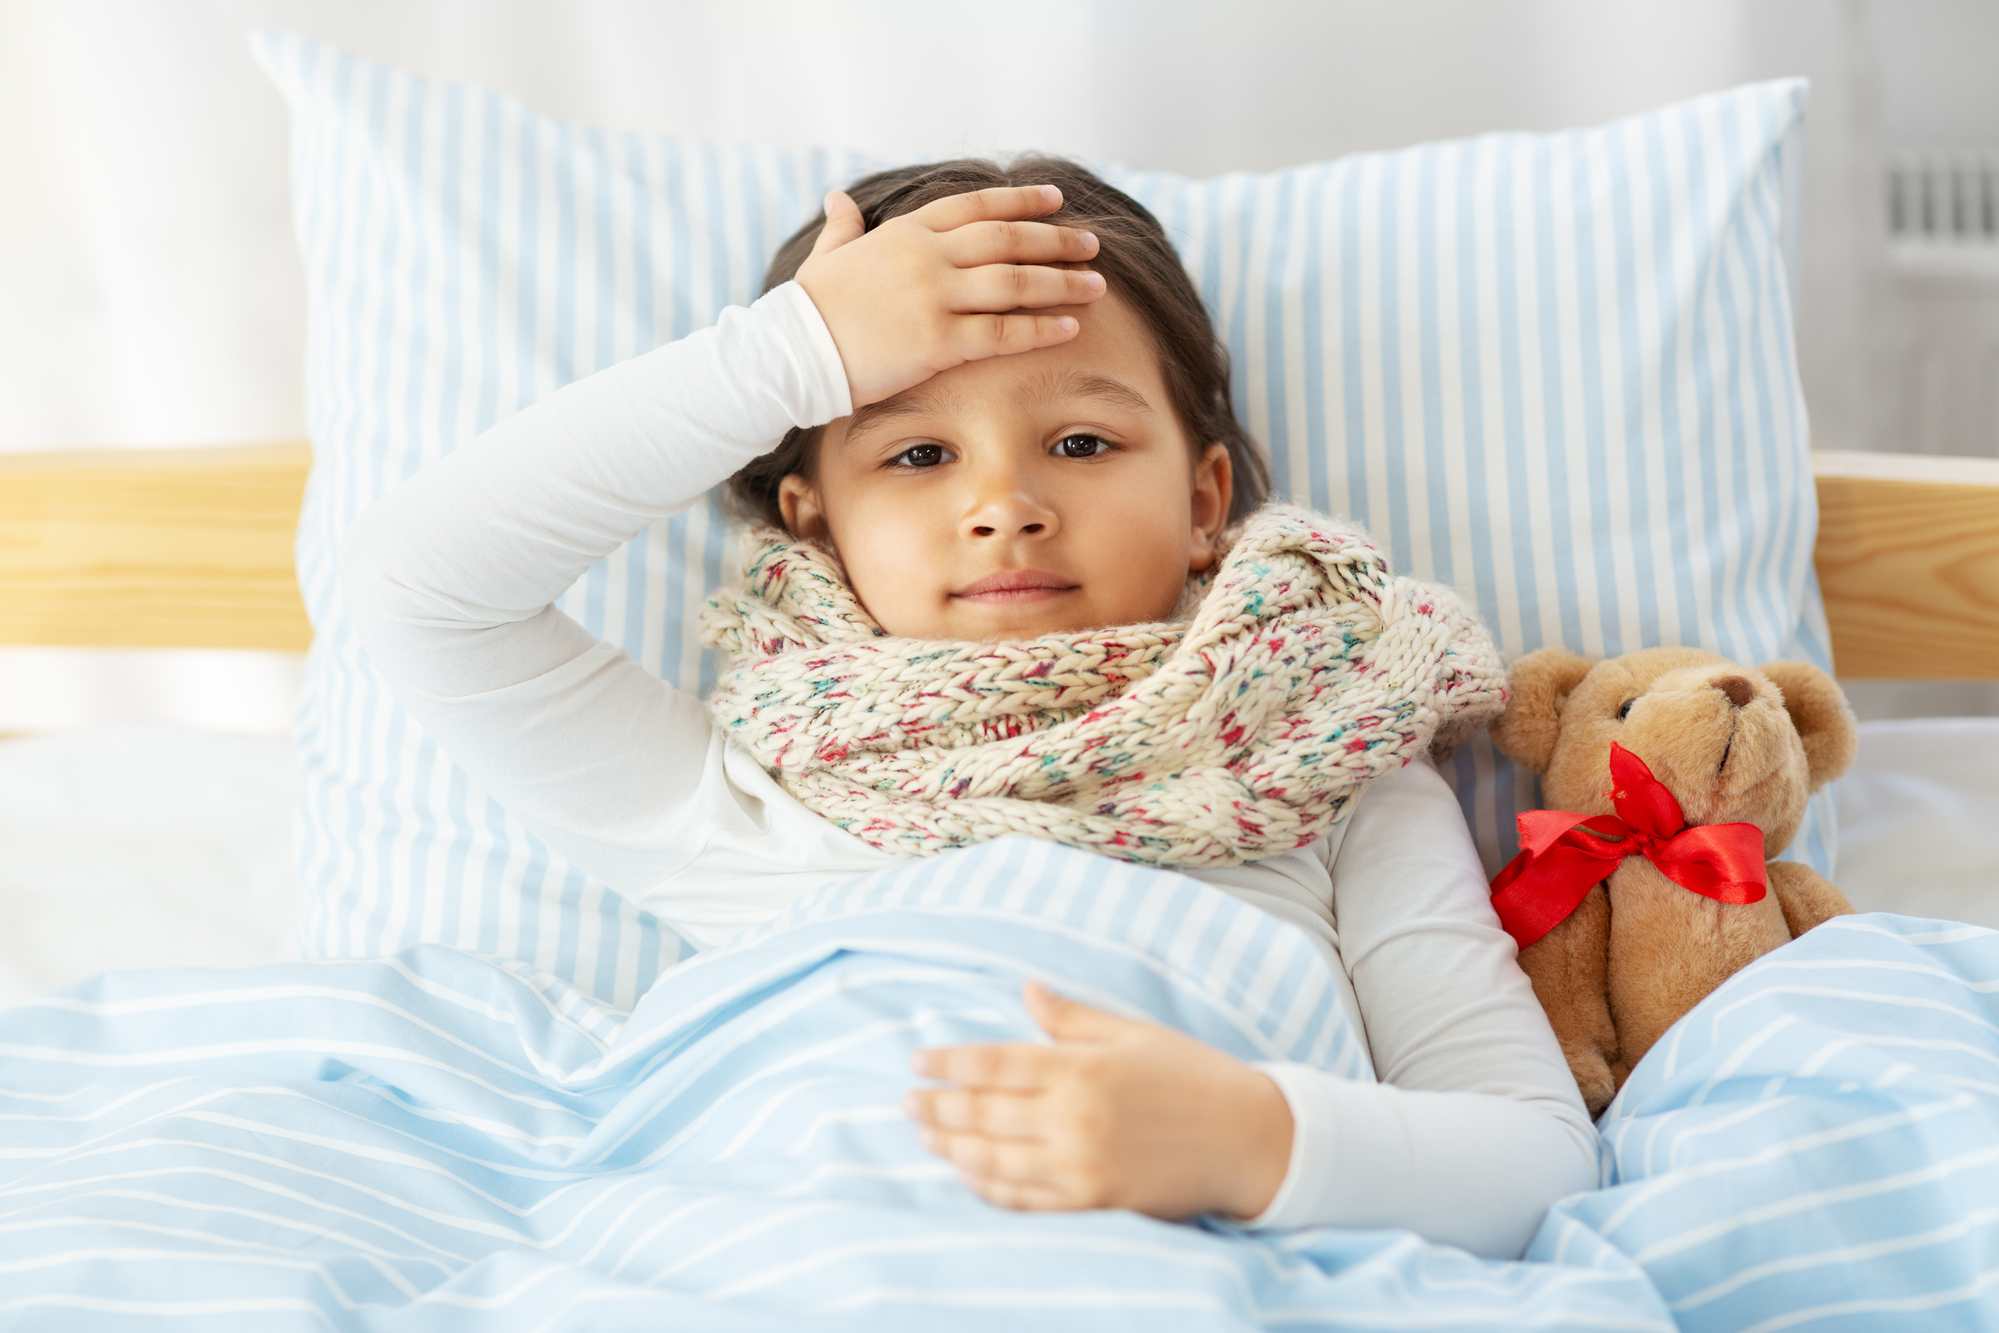 A young child lies in bed with a thermometer in their mouth, looking unwell, accompanied by a teddy bear with a red bow